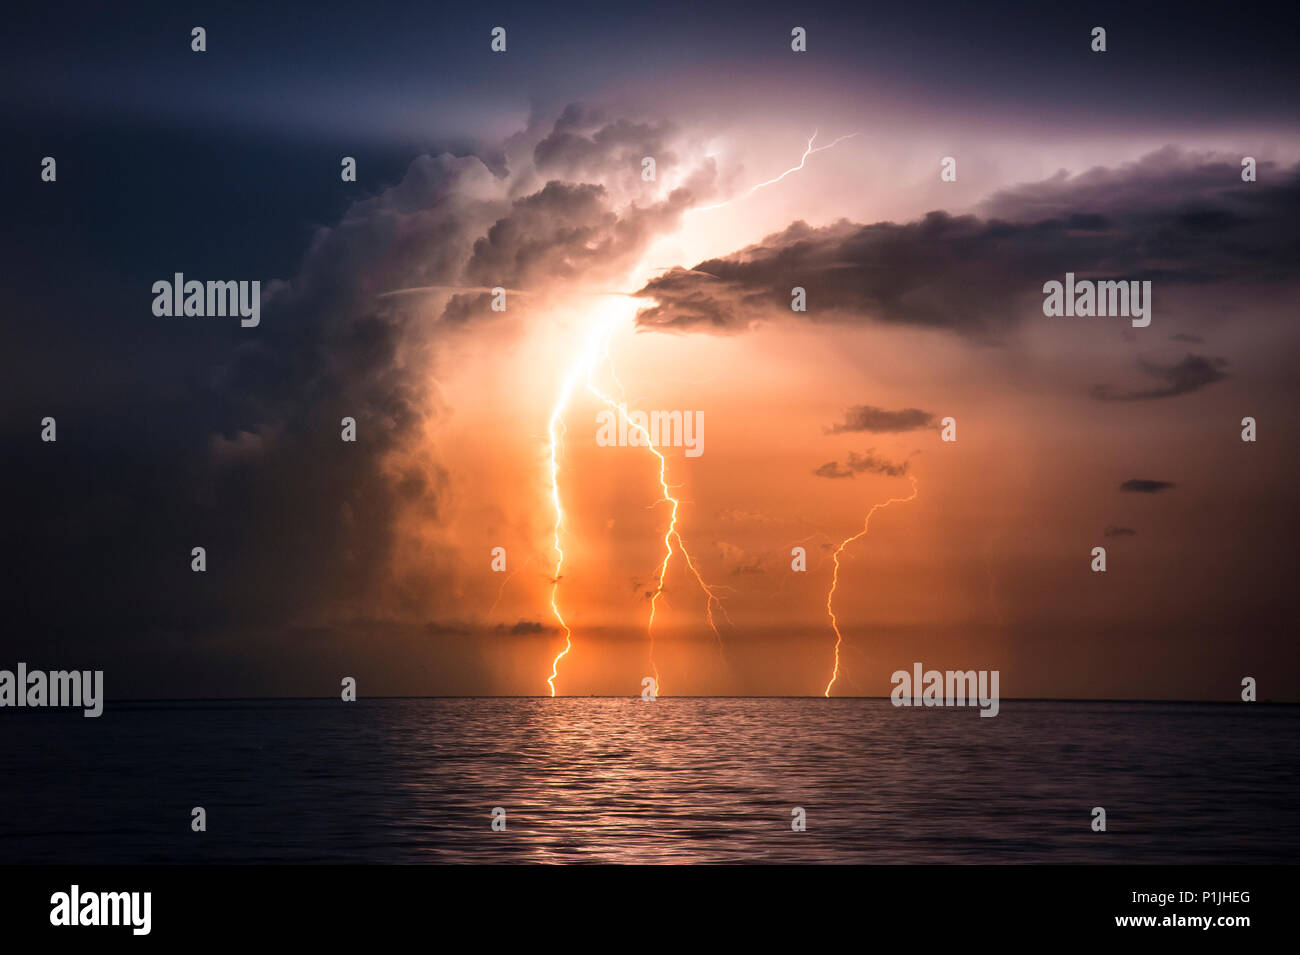 Strong cloud-ground lightning discharges from well-sheared updraft tower above the lake Maracaibo (Catatumbo thunderstorm, the place with the highest lightning density worldwide), Ologa, Zulia, Venezuela, South America Stock Photo